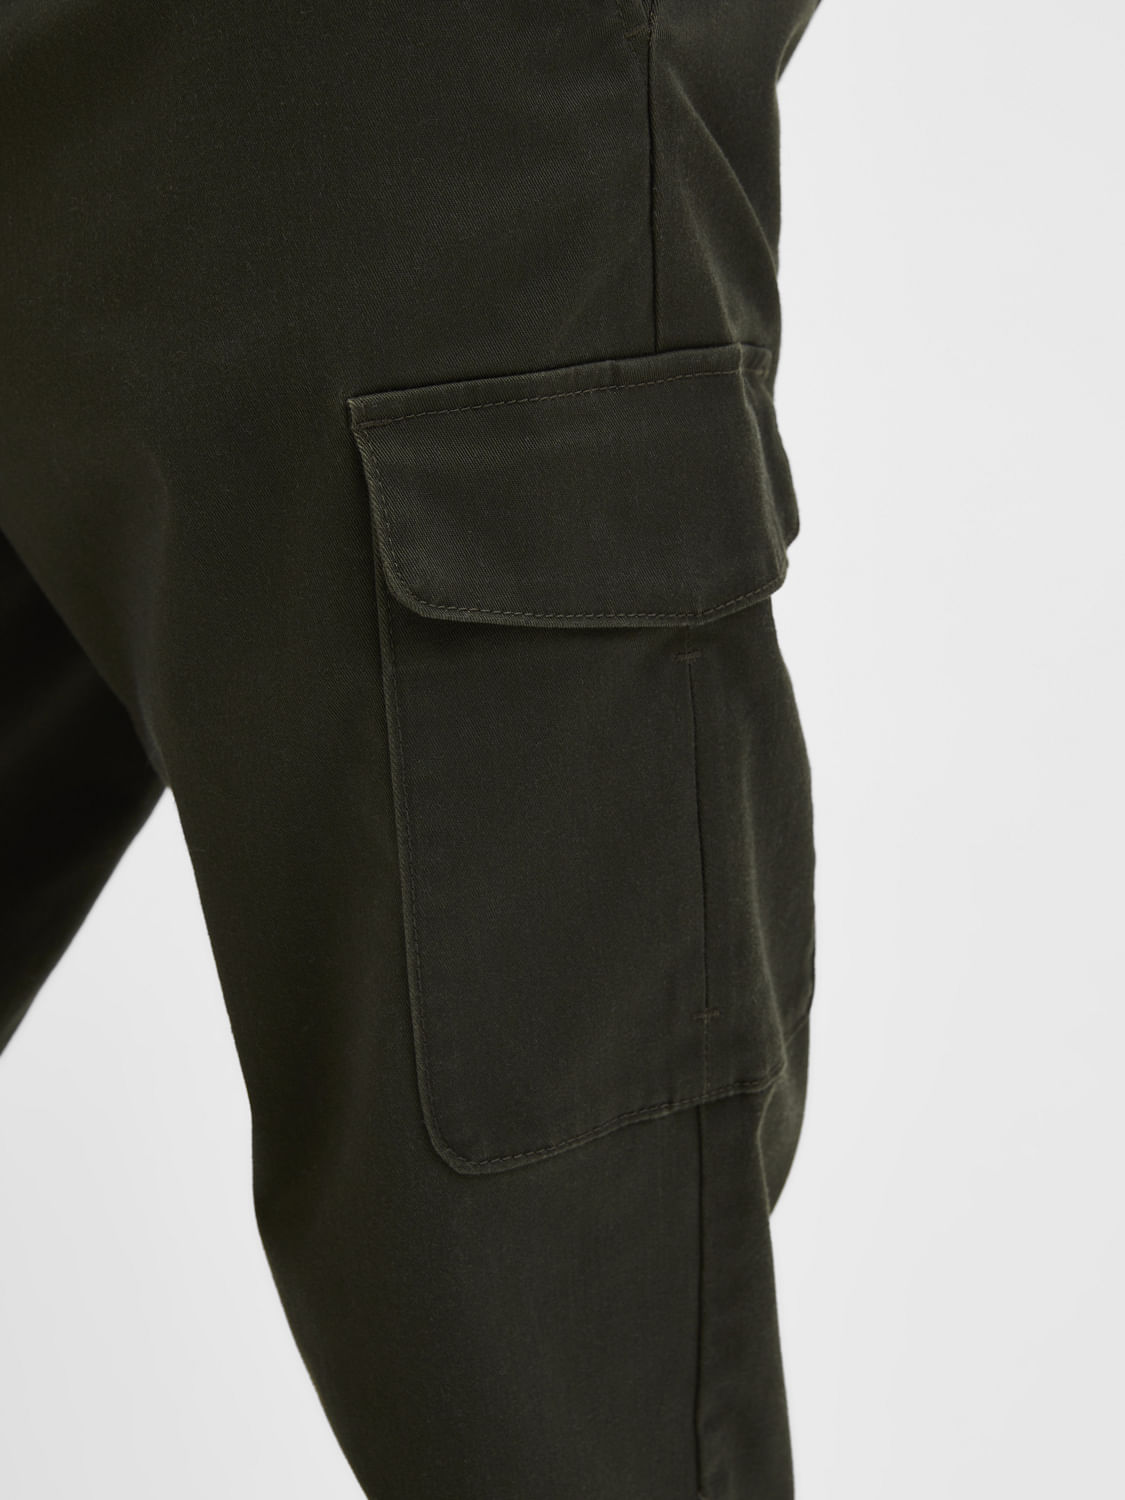 Washable Olive Green Formal Wear Mens Plain Cotton Pant at Best Price in  Tirupur  Pss Garments